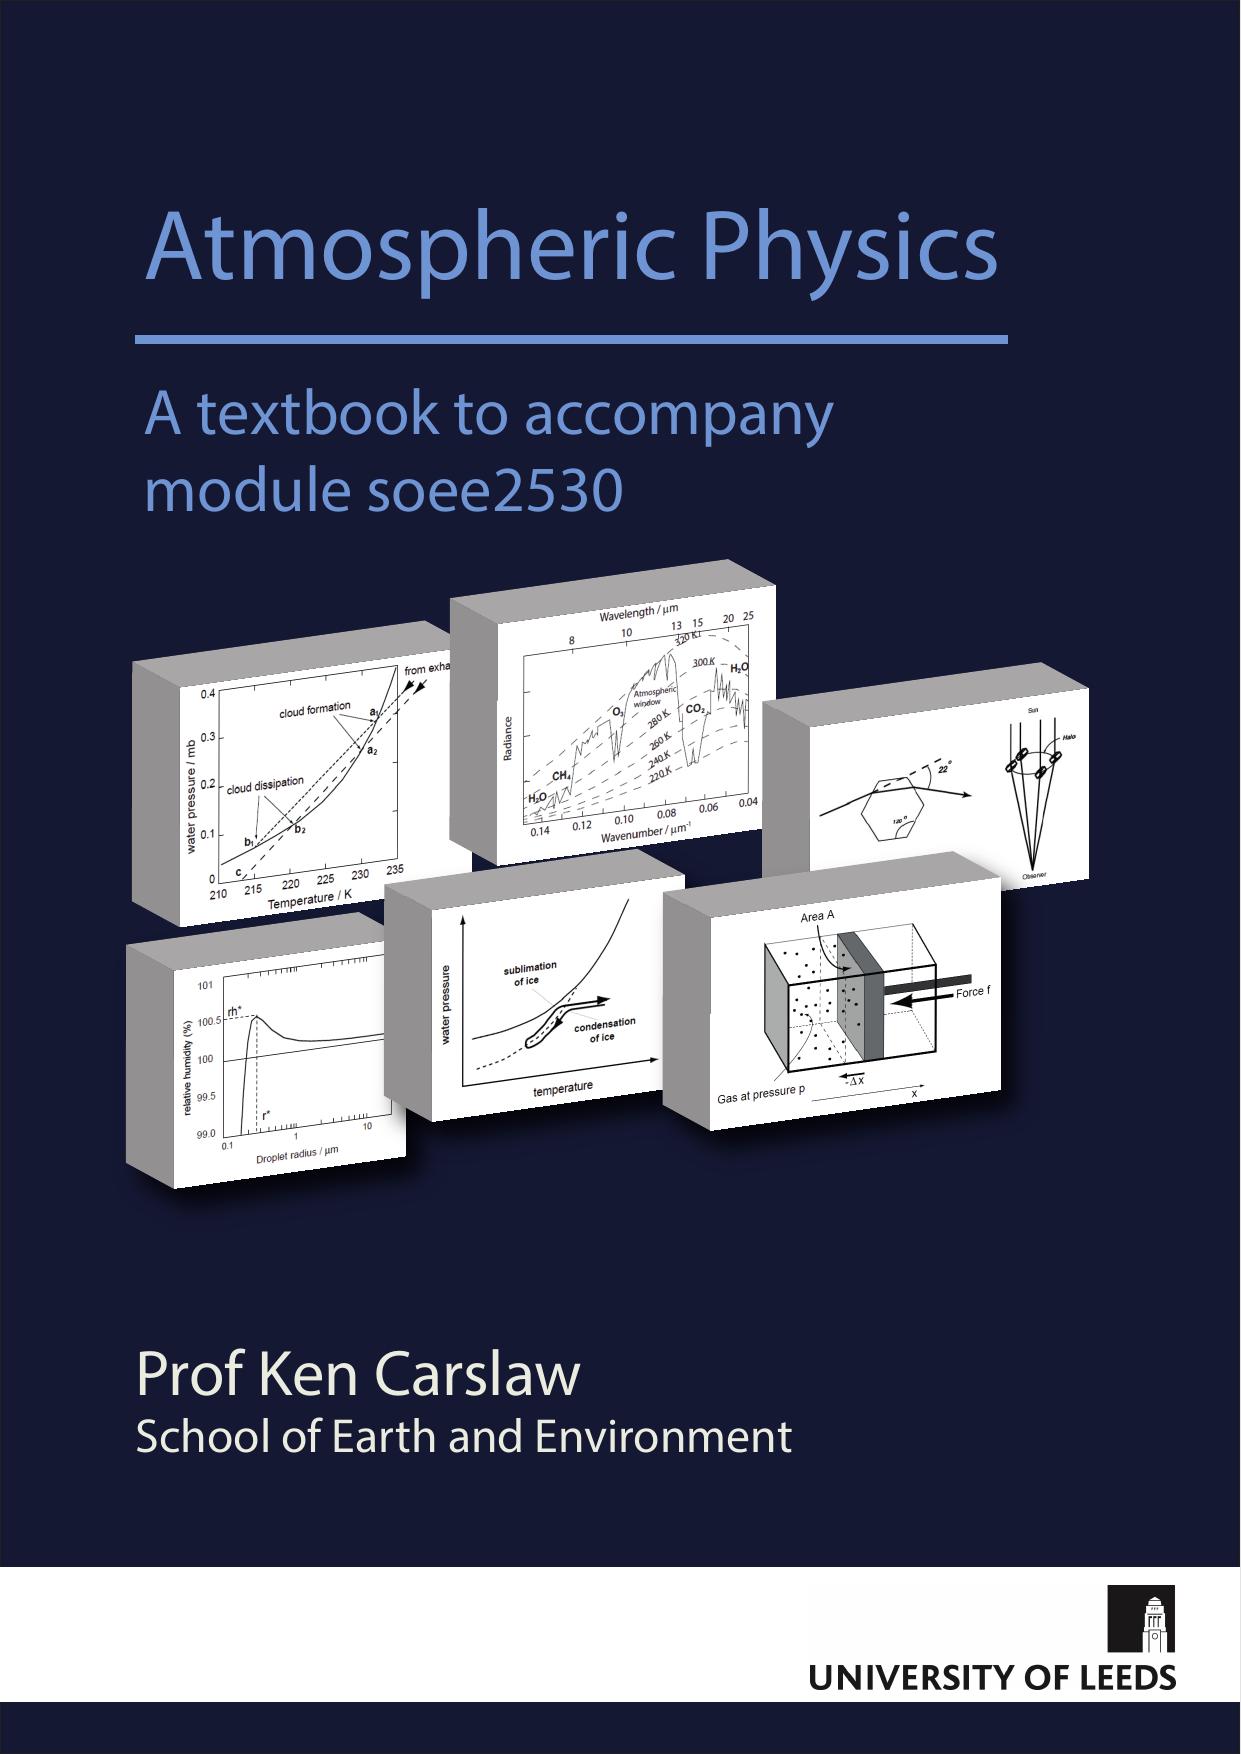 Lectures in Atmospheric Physics 2014